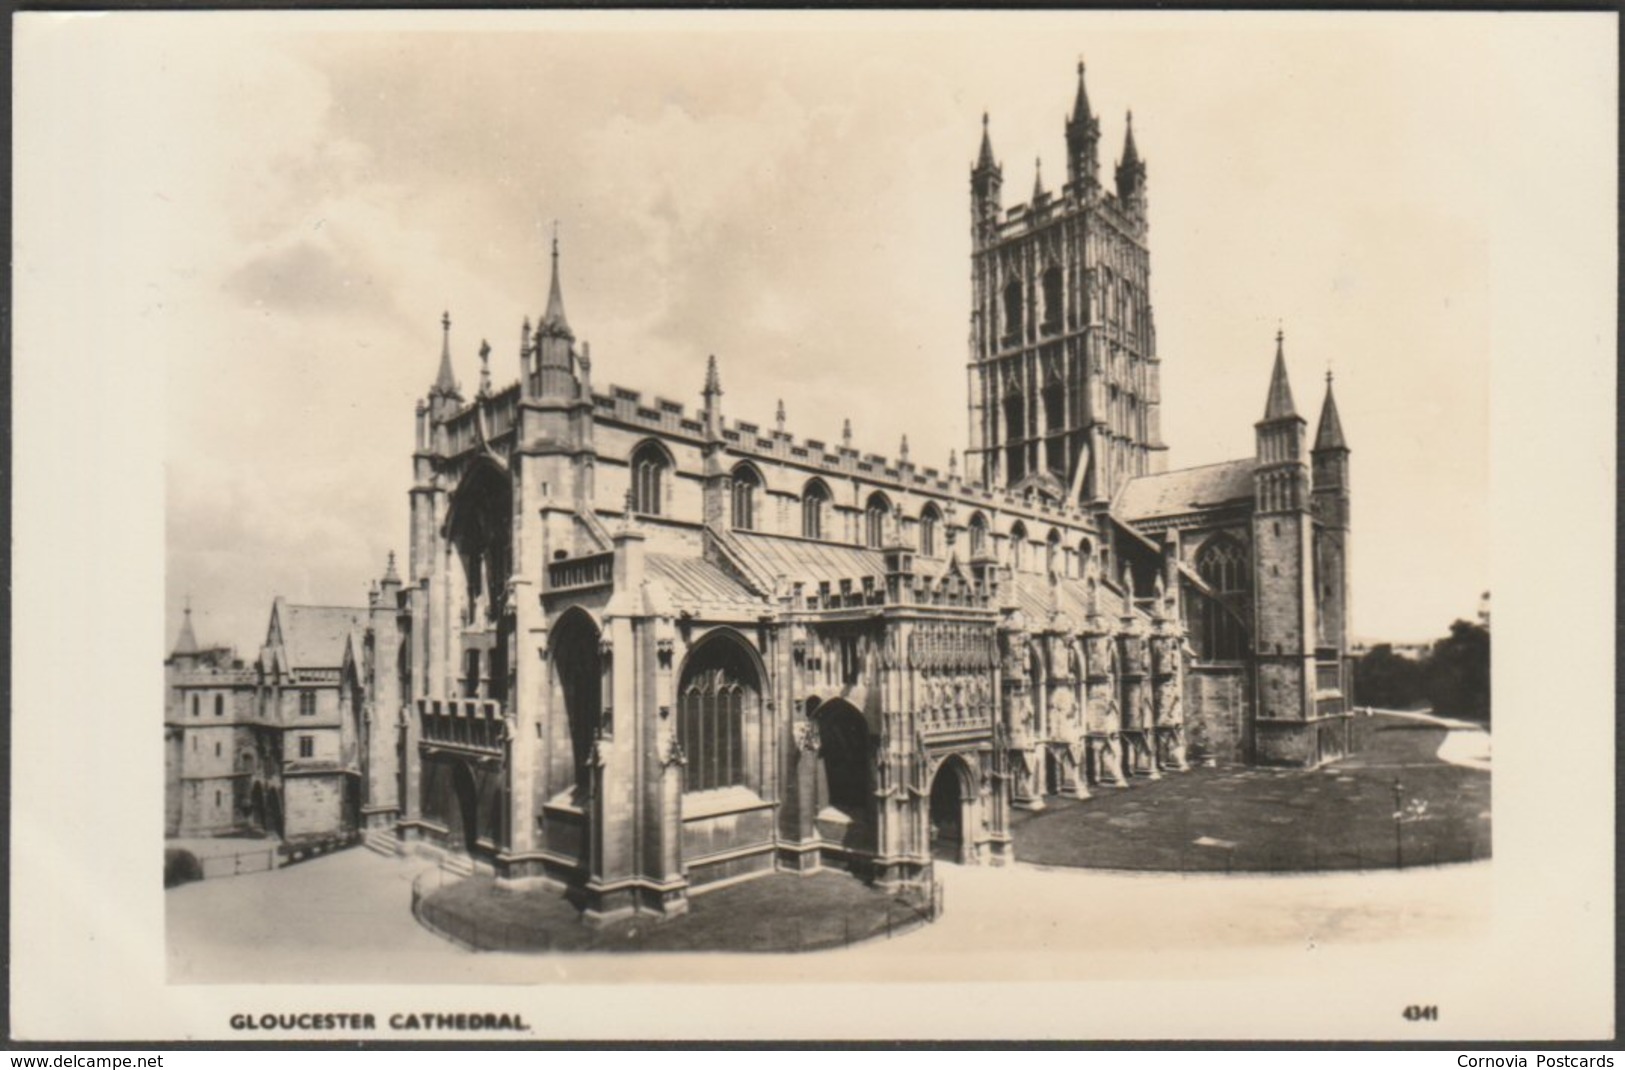 Gloucester Cathedral, Gloucestershire, C.1950 - Photochrom RP Postcard - Gloucester